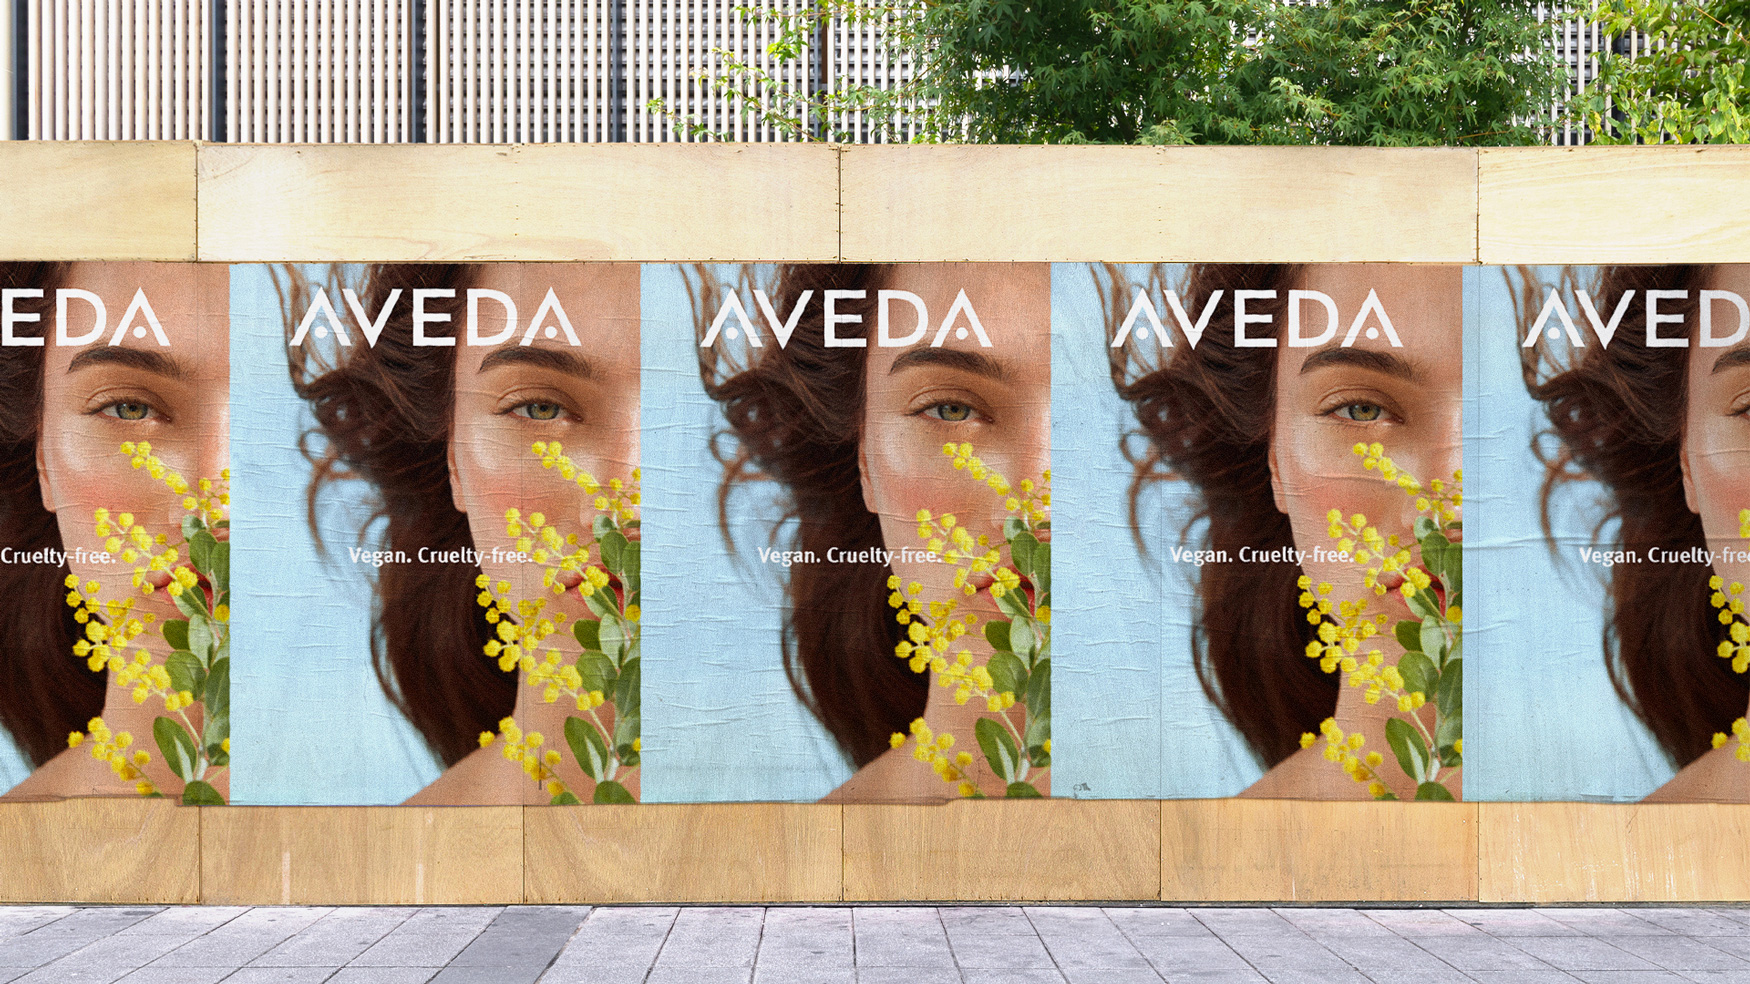 AVEDA-SMR-outdoor-pasted-poster-wall